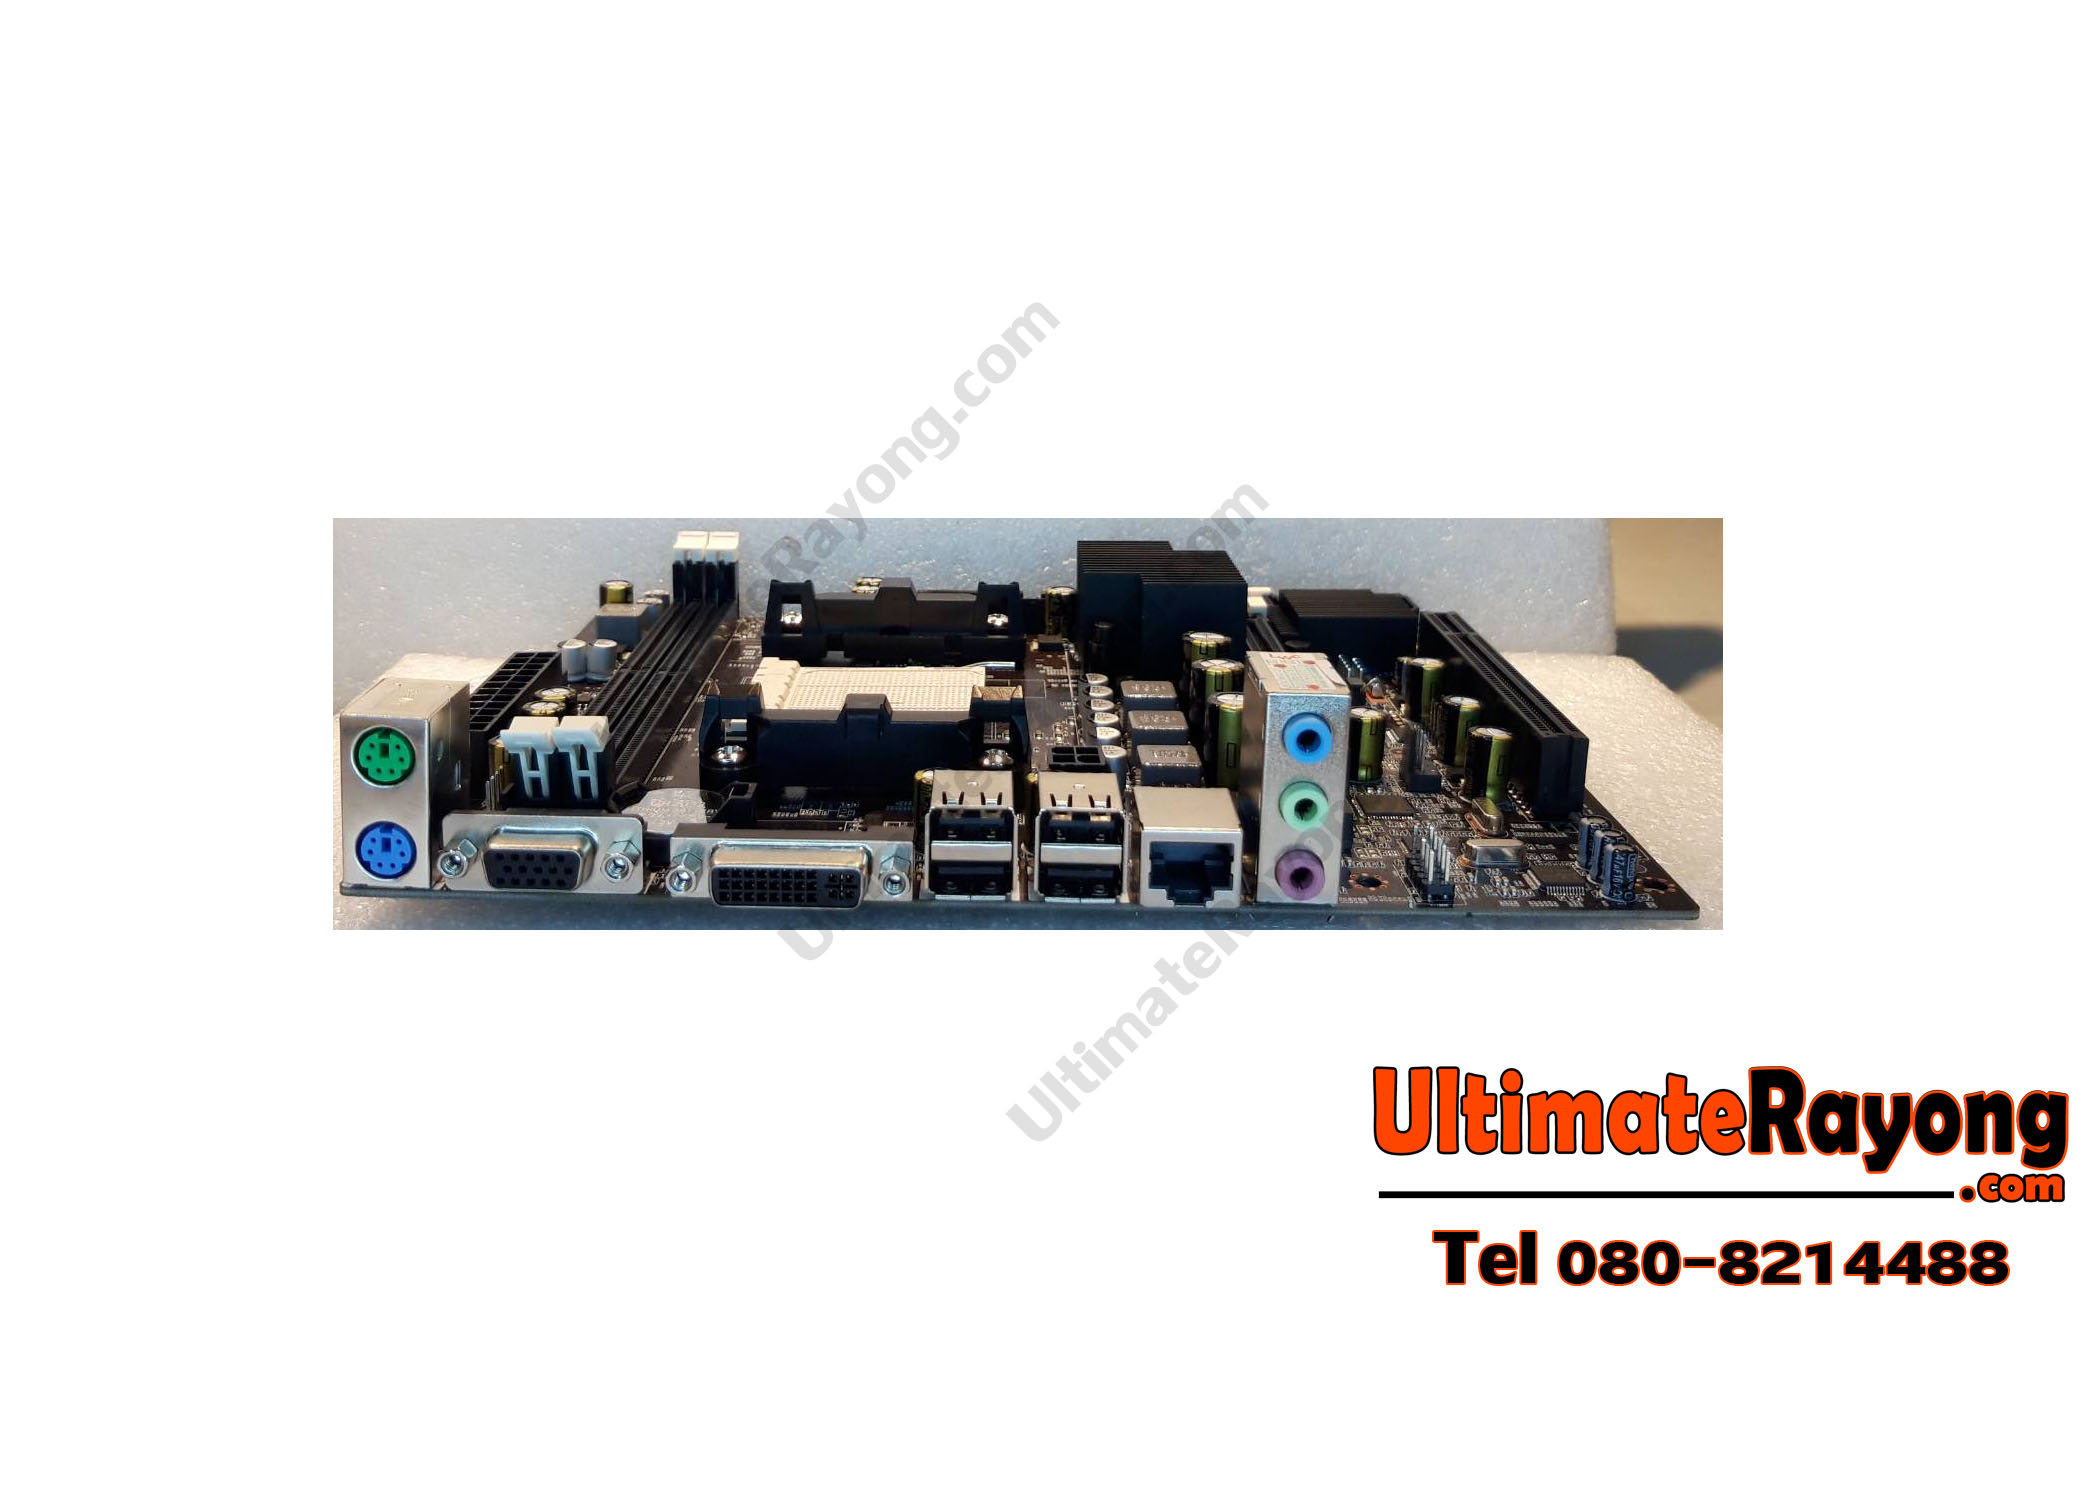 Mainboard A780M-DSN AM2 for AMD